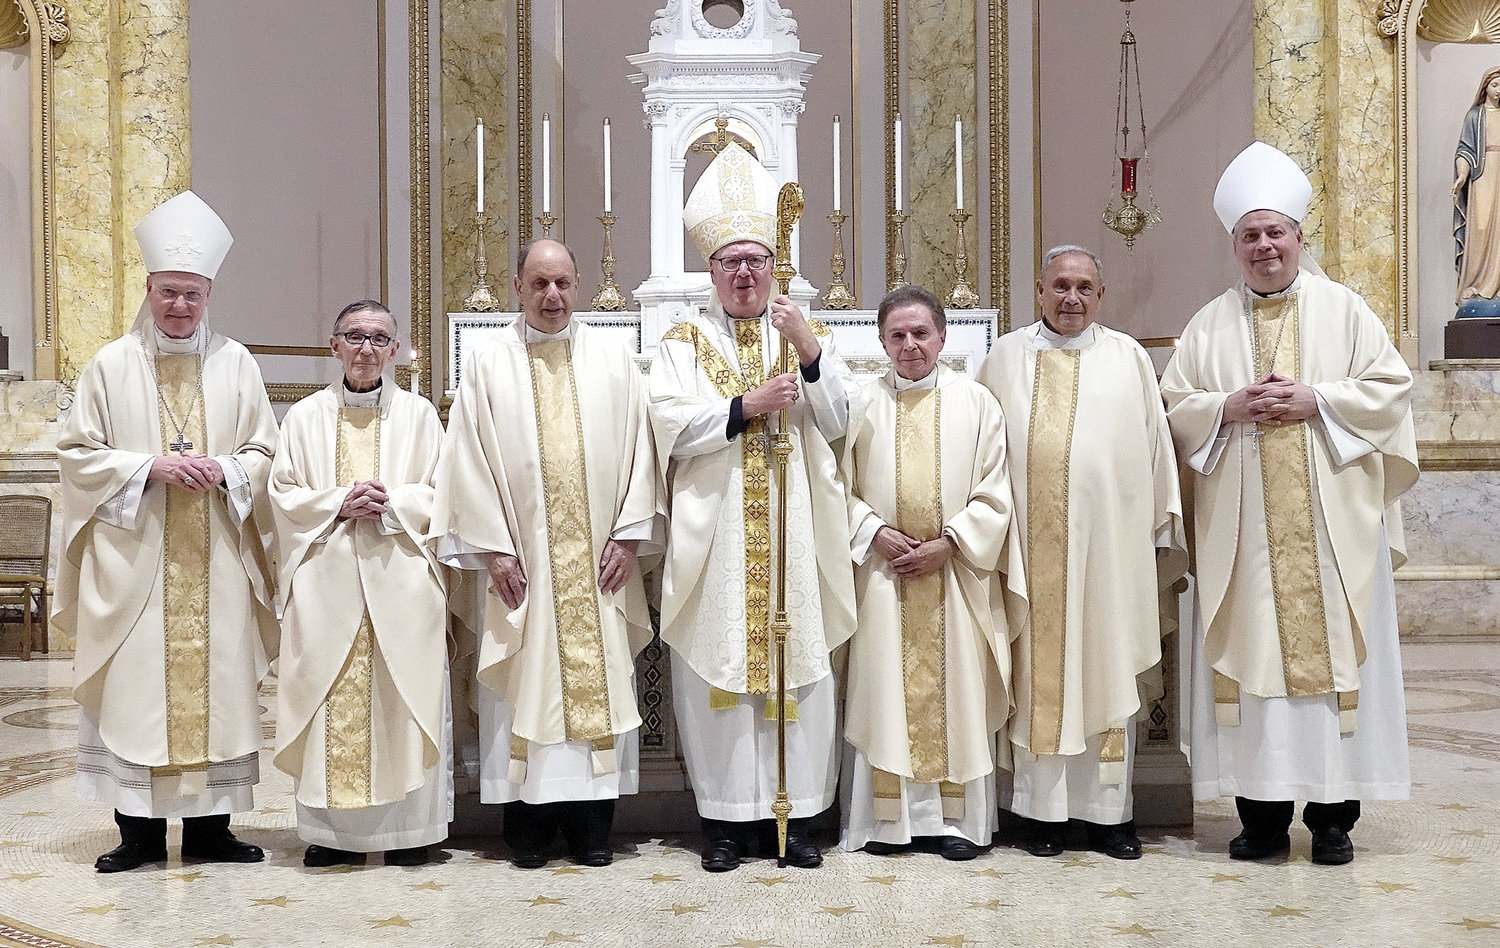 GOLDEN JUBILARIANS—Members of the Ordination Class of 1972 join Auxiliary Bishop Edmund Whalen, left; Cardinal Dolan and Auxiliary Bishop John Bonnici, right. Marking their jubilees are, from left: Msgr. Thomas Derivan, Father Robert DeJulio, Father Robert Grippo and Father John Vigilanti.